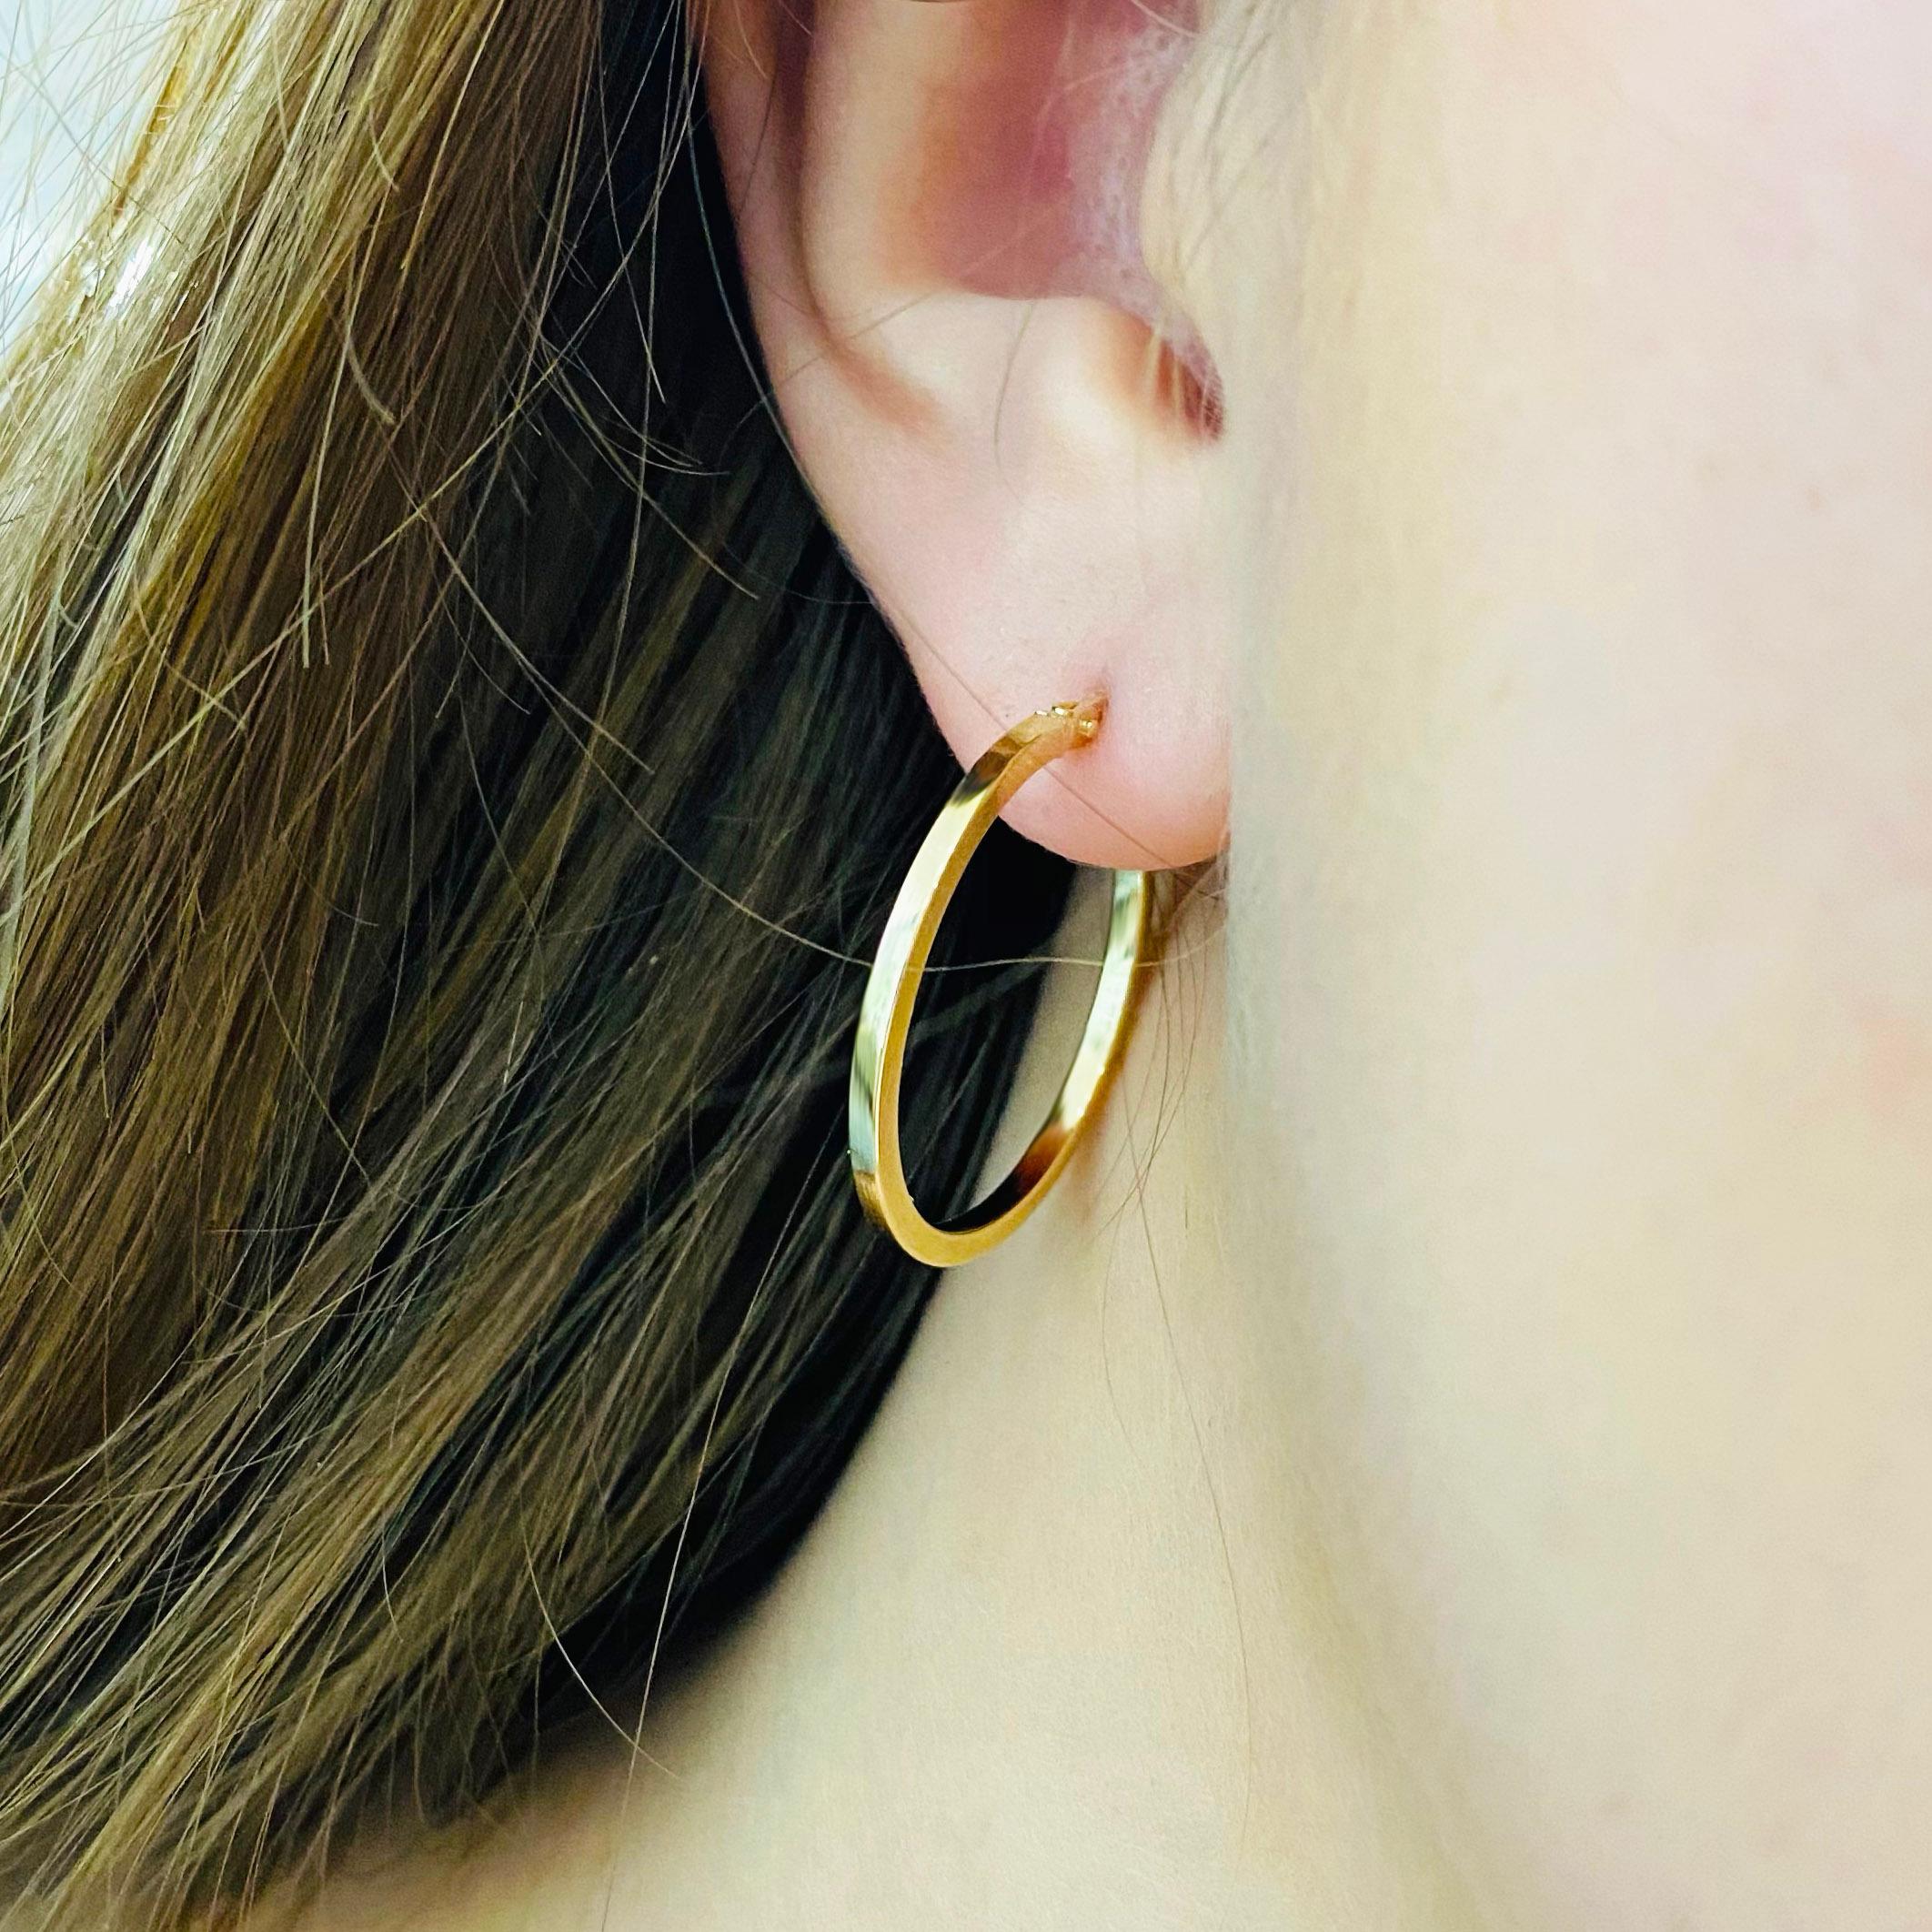 These stunning polished 14k yellow gold hoops provide a look that is both trendy and classic. While they were once worn by kings and queens to signify power and social status, hoop earrings are now considered a statement of unity and strength. Hoop